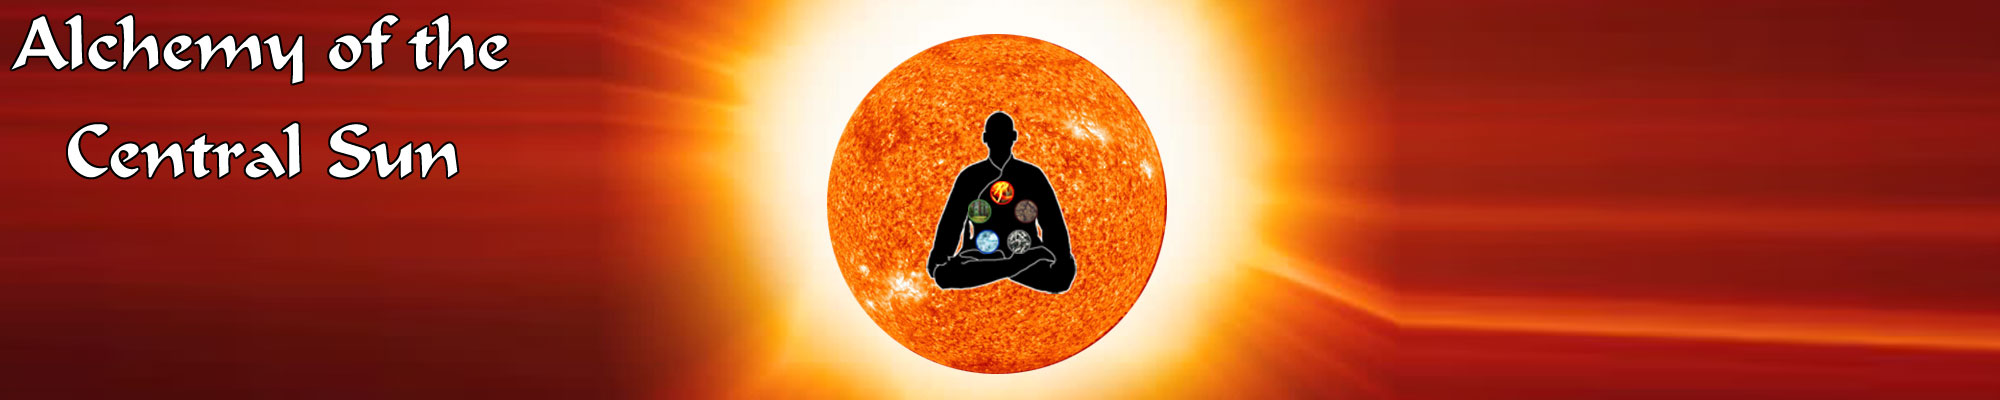 Alchemy of the Central Sun QI GONG Energy meditation series